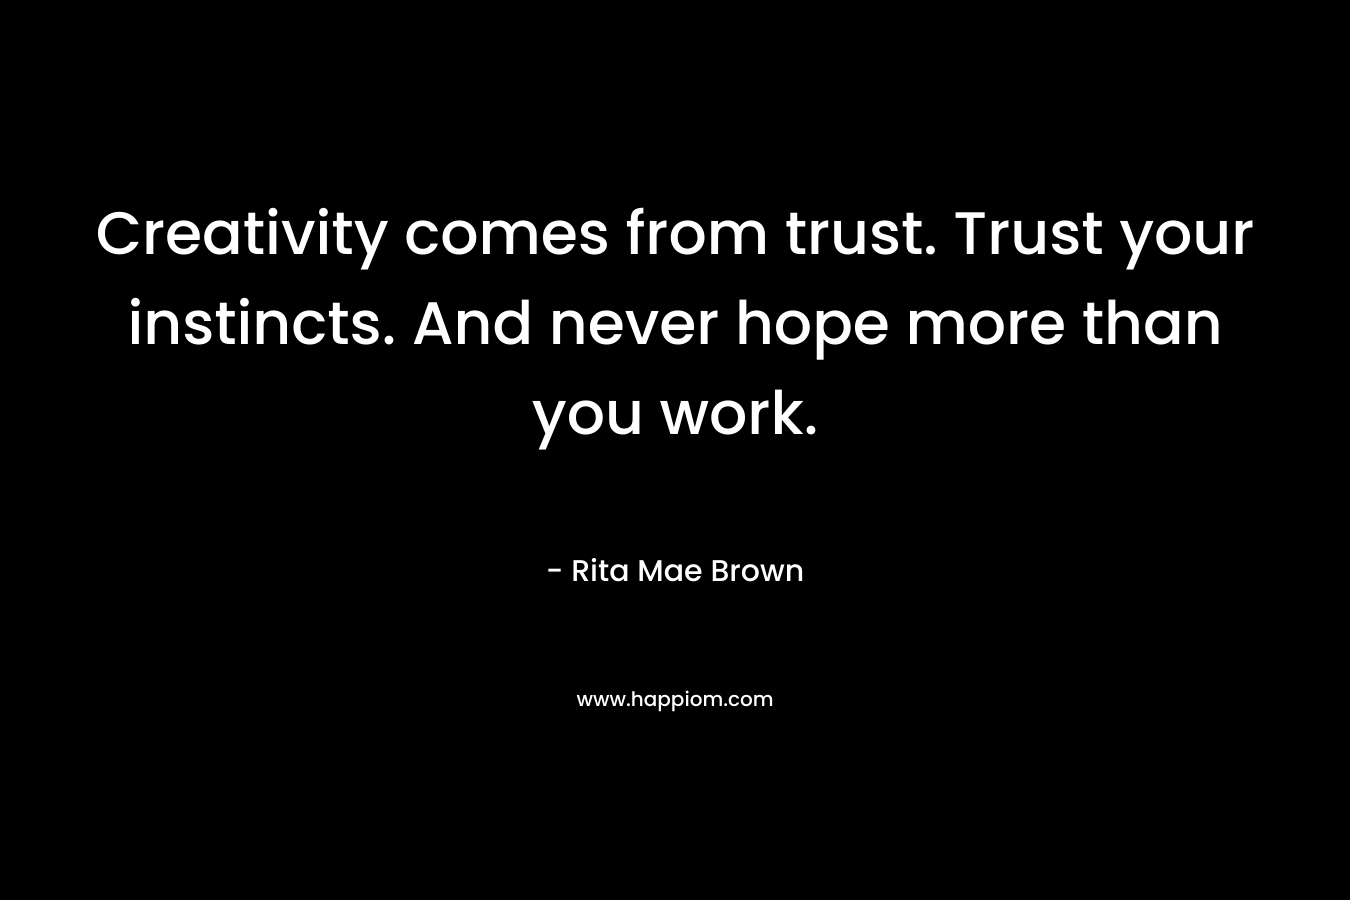 Creativity comes from trust. Trust your instincts. And never hope more than you work.